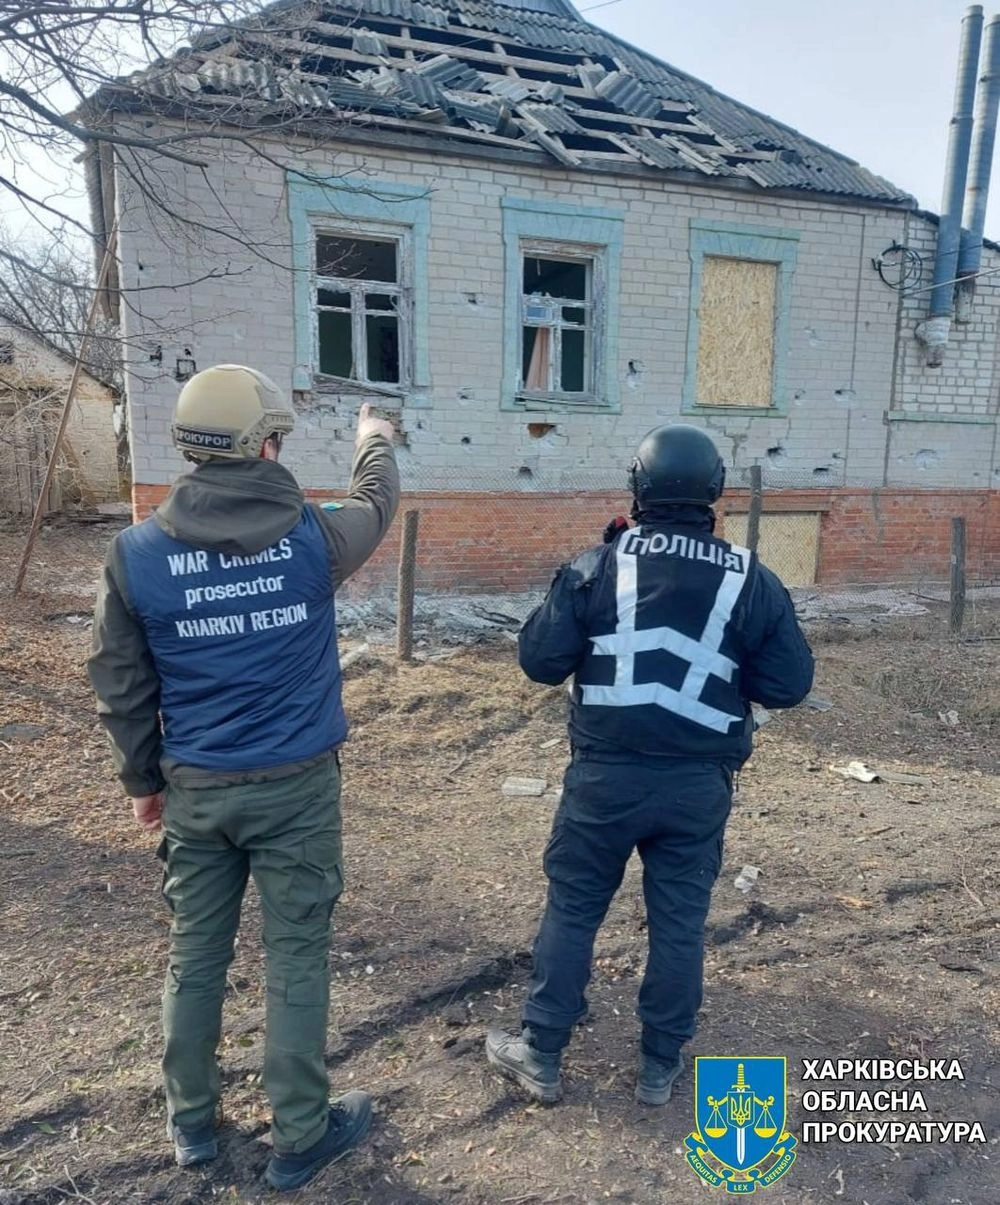 russians attack Kupyansk district with artillery and aircraft: a 63-year-old man is wounded